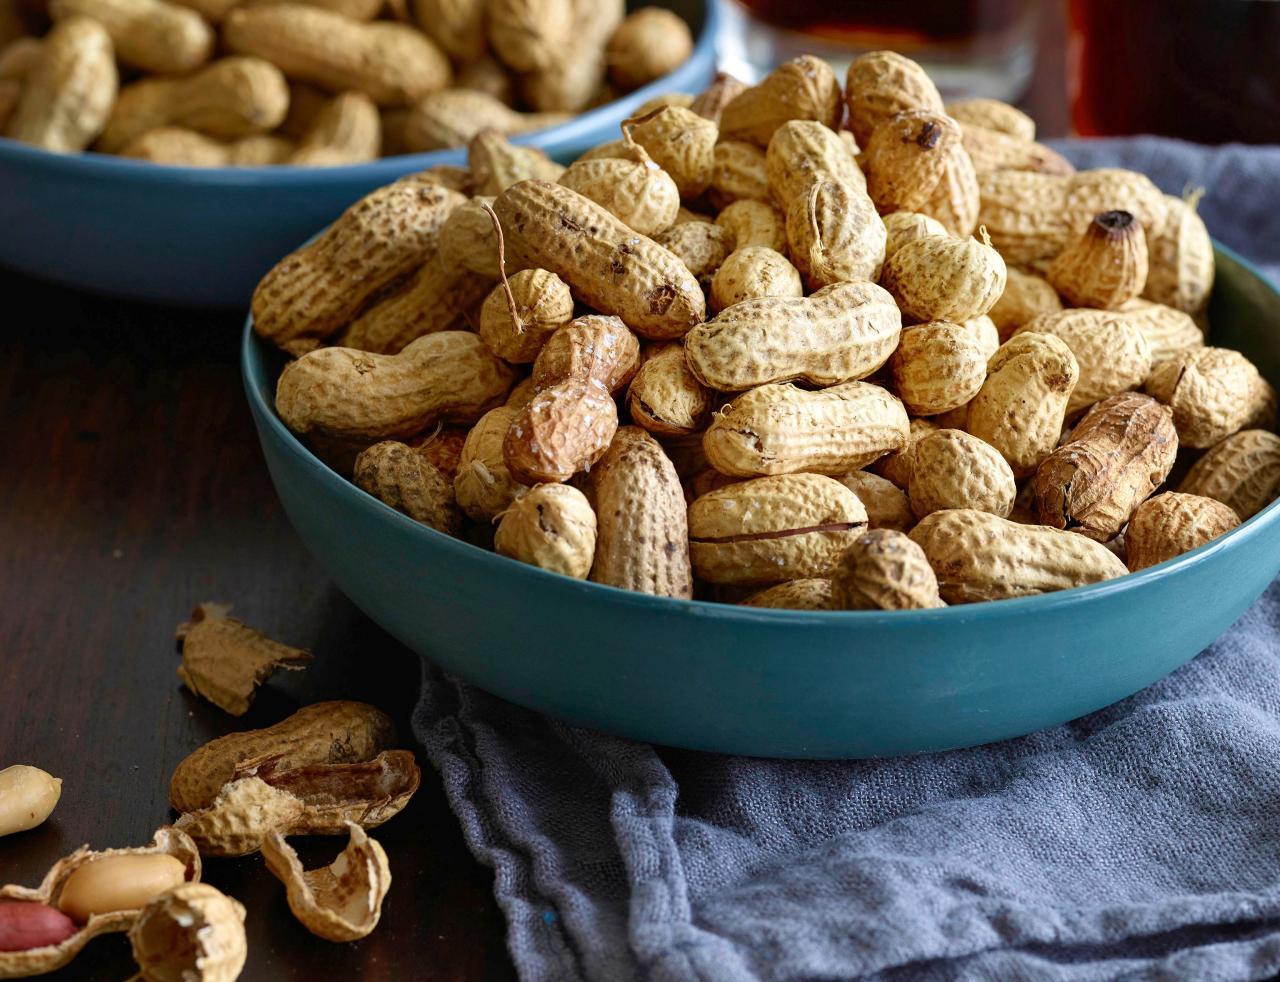 How To Store Roasted Peanuts